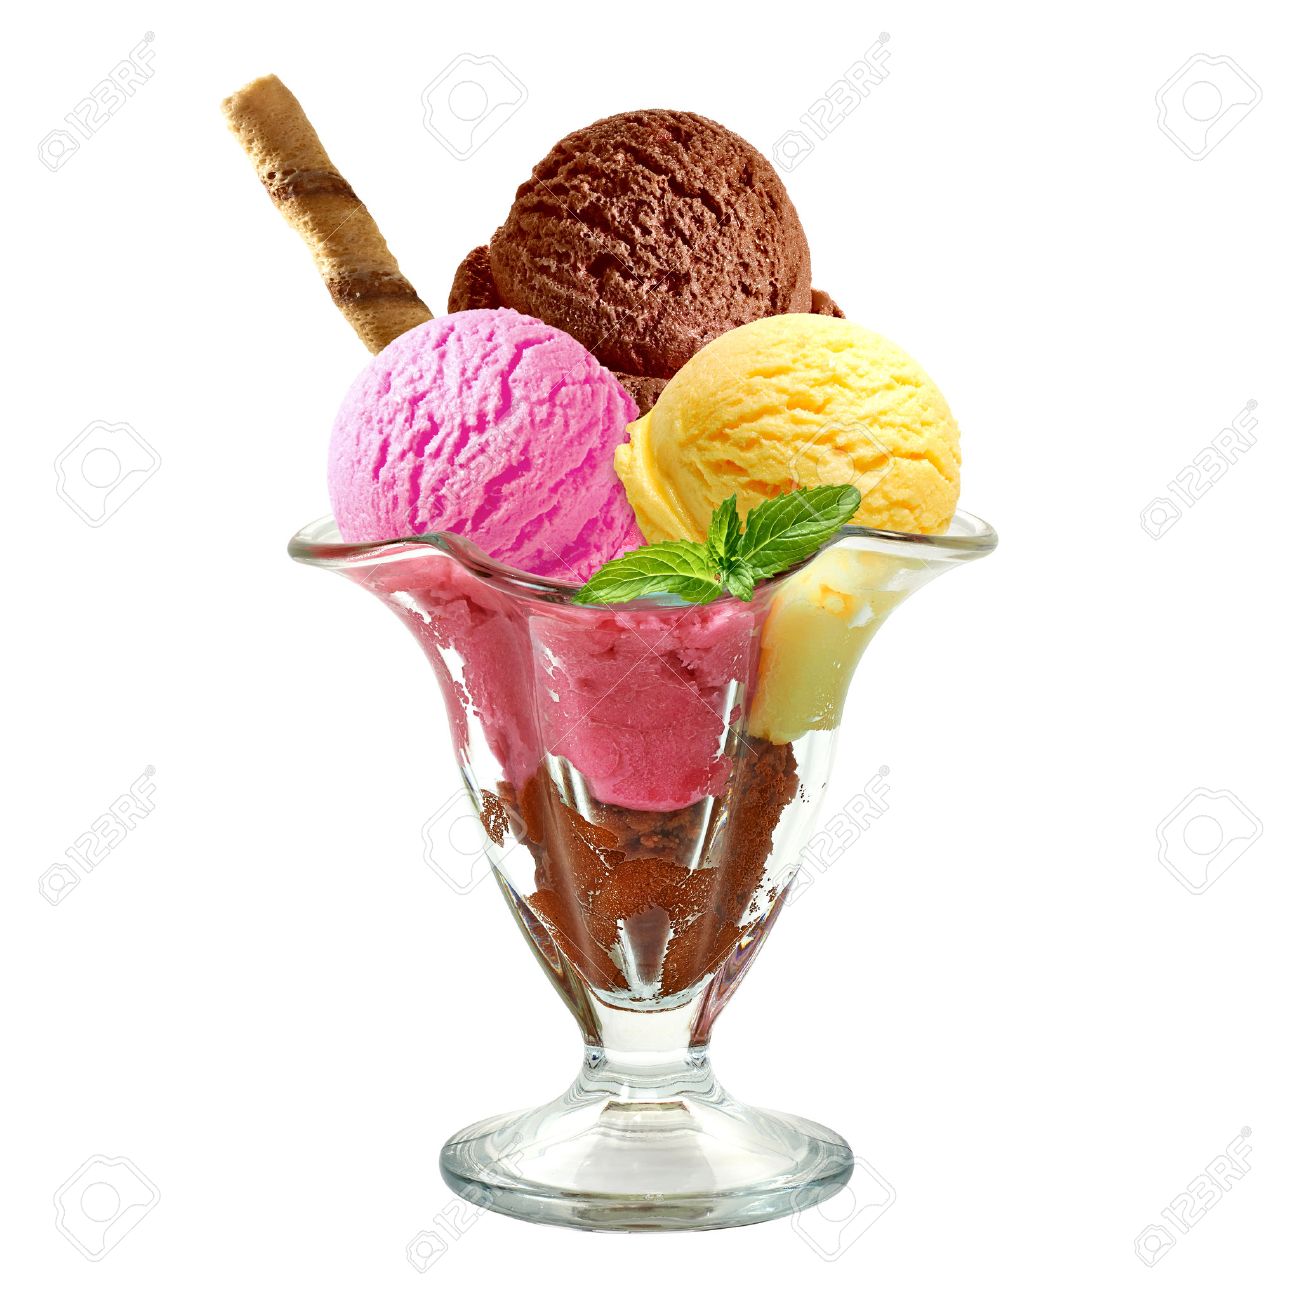 Ice Cream In Sundae Cup On White Background Stock Photo Picture